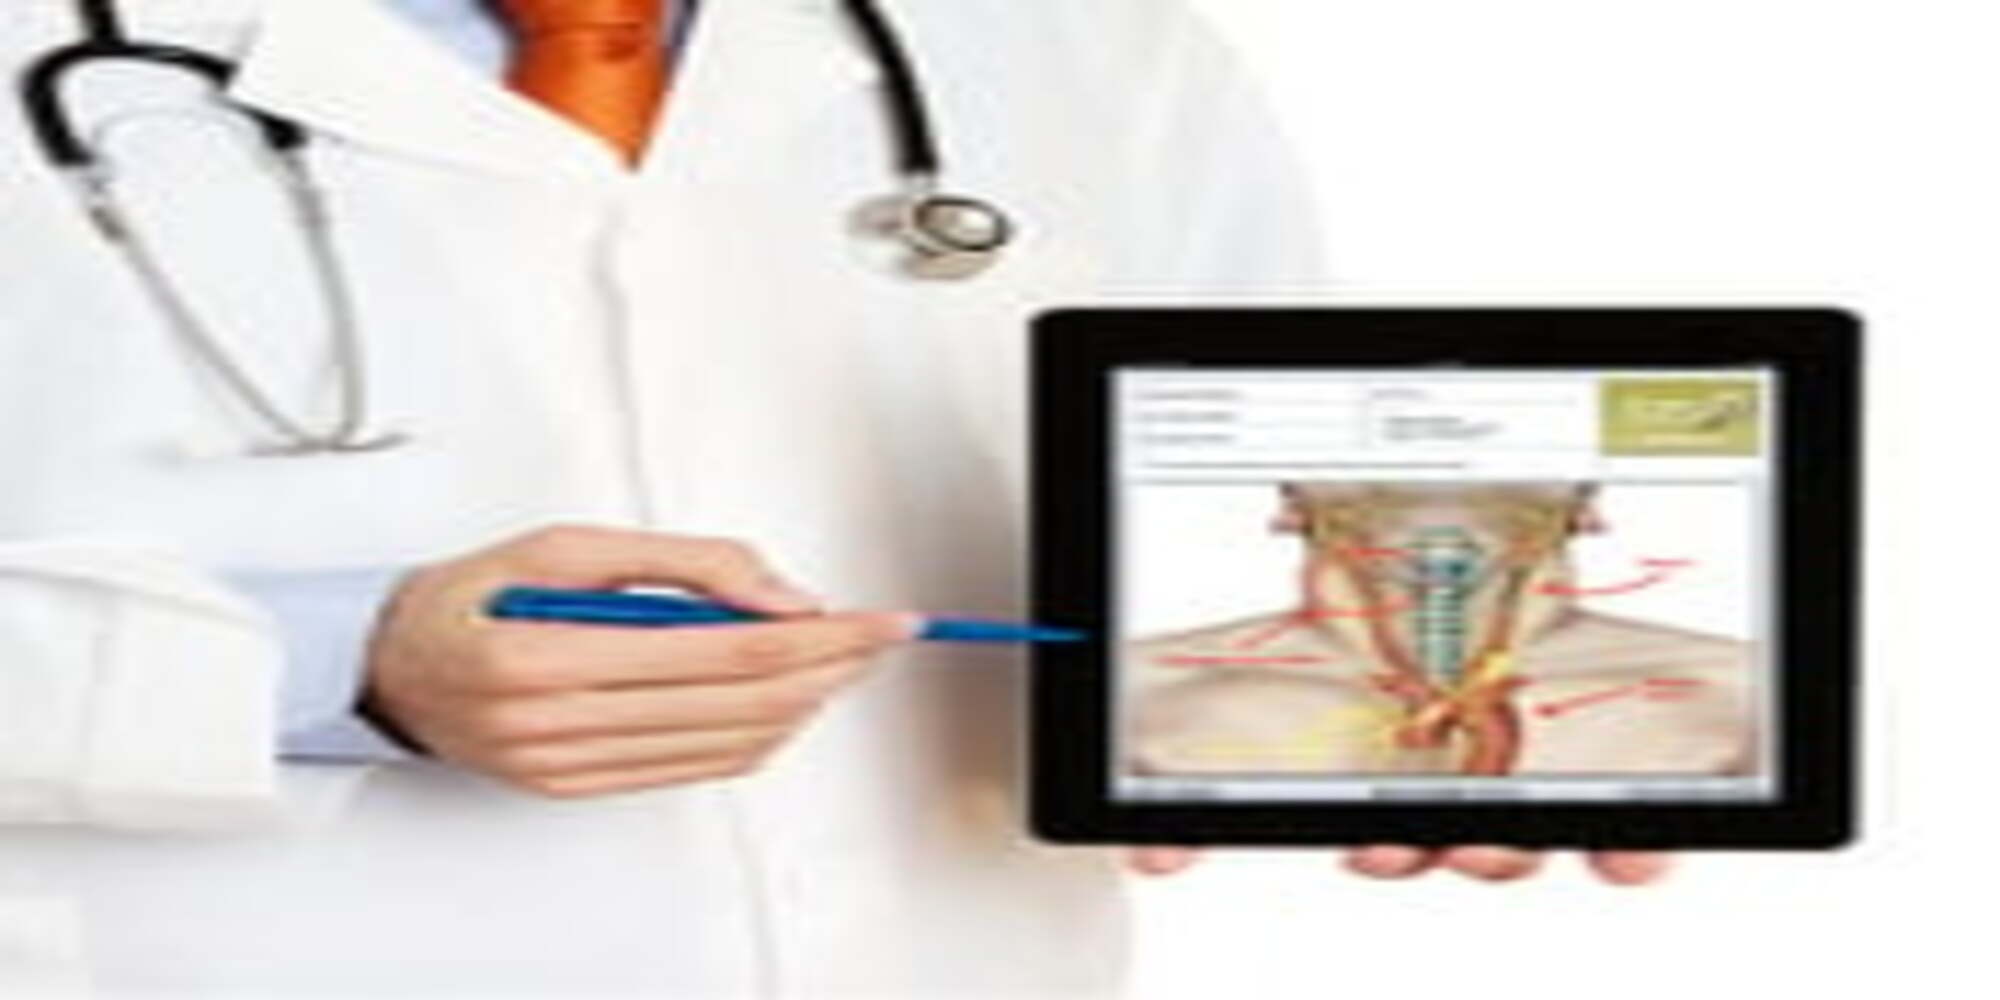 BYOD on Hospital Wireless Networks Gains Popularity